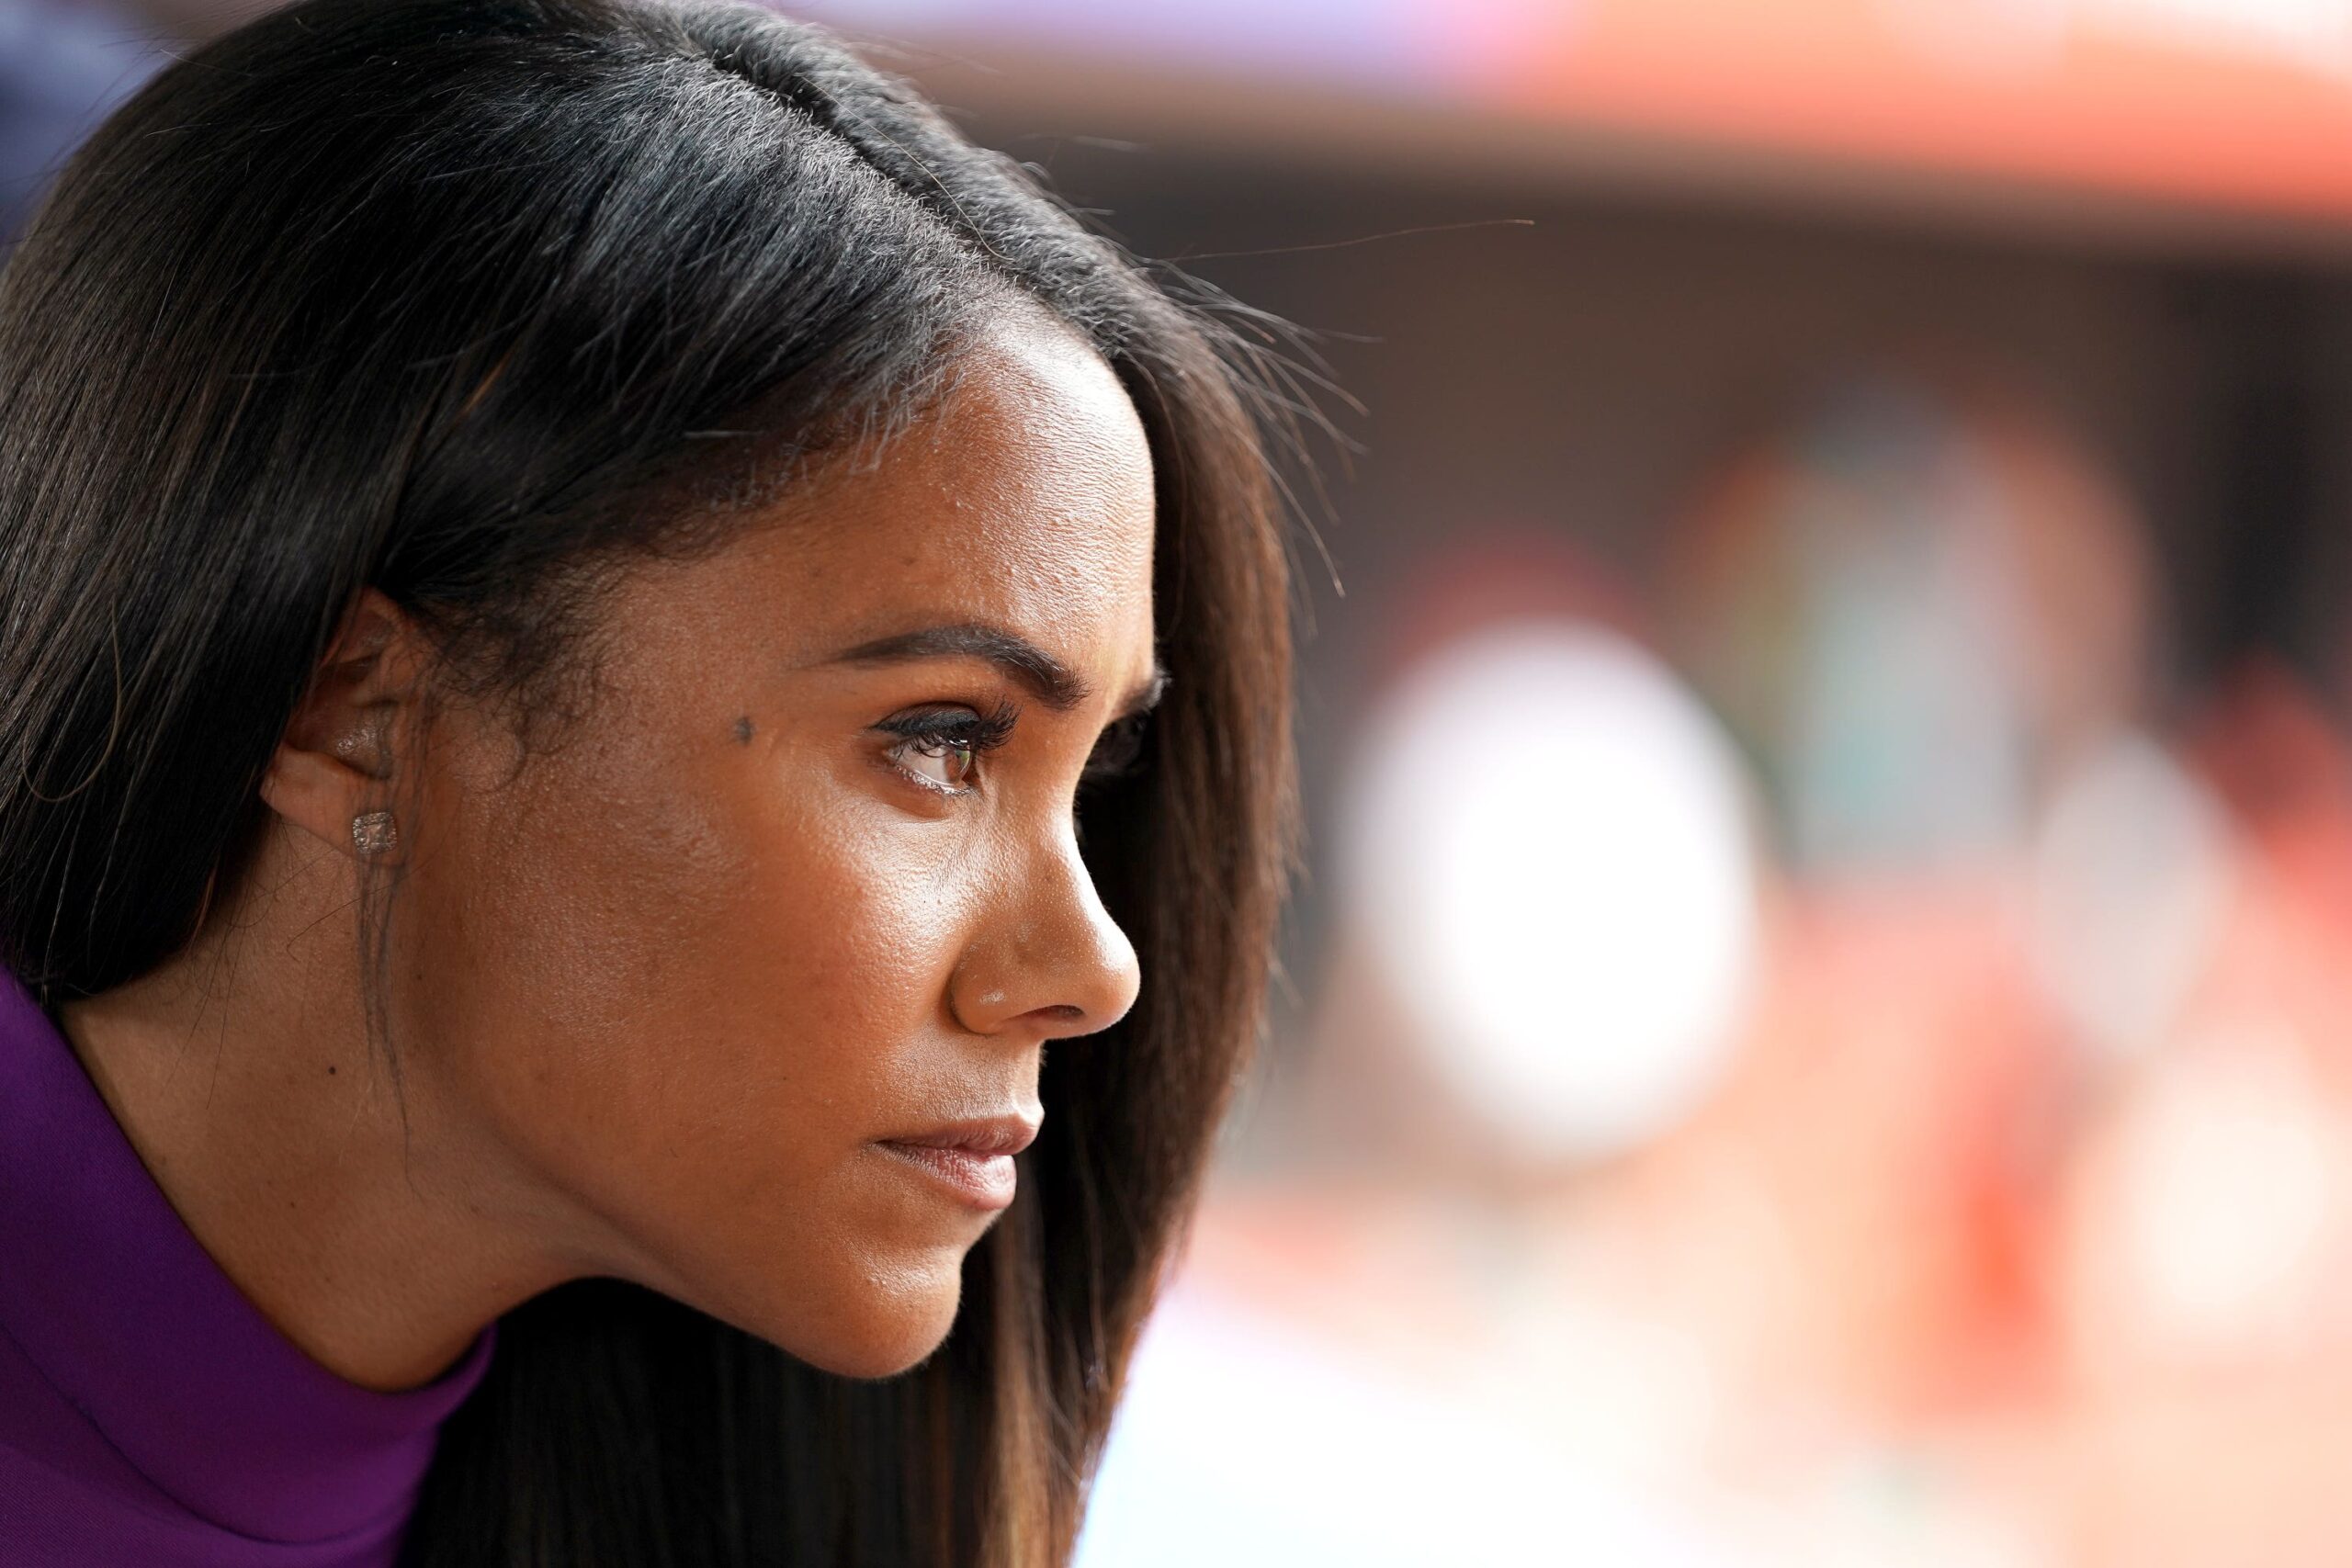 Alex Scott On Why Her Mum Is Her Role Model And How Parents Can Help Kids Find Theirs